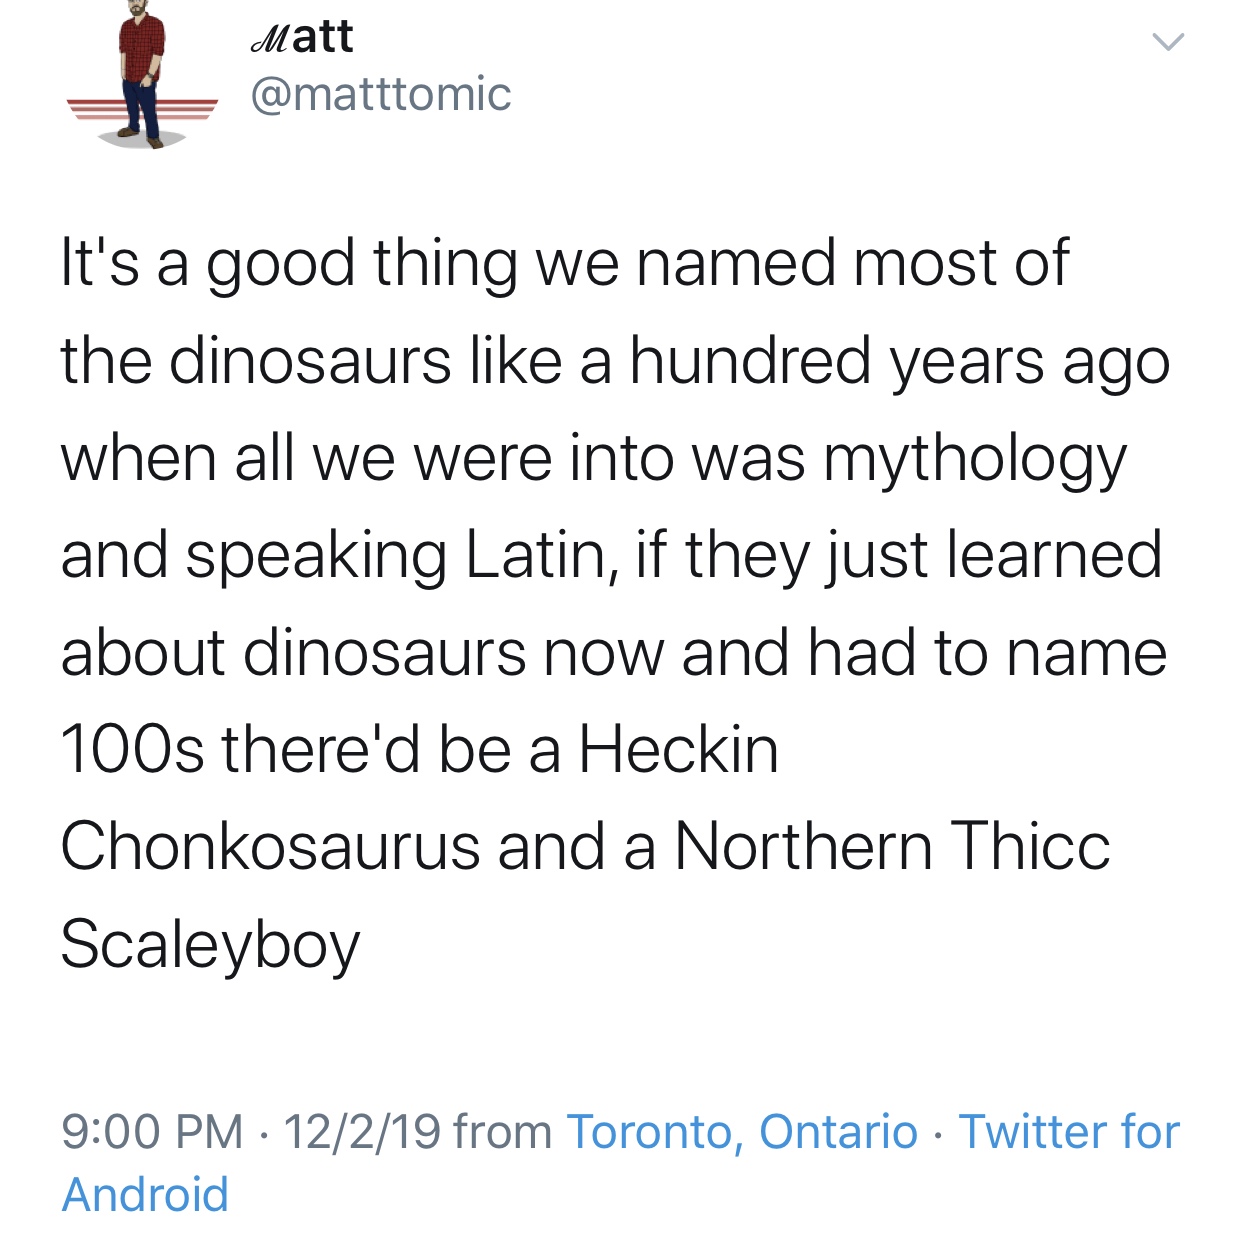 angle - Matt It's a good thing we named most of the dinosaurs a hundred years ago when all we were into was mythology and speaking Latin, if they just learned about dinosaurs now and had to name 100s there'd be a Heckin Chonkosaurus and a Northern Thicc S